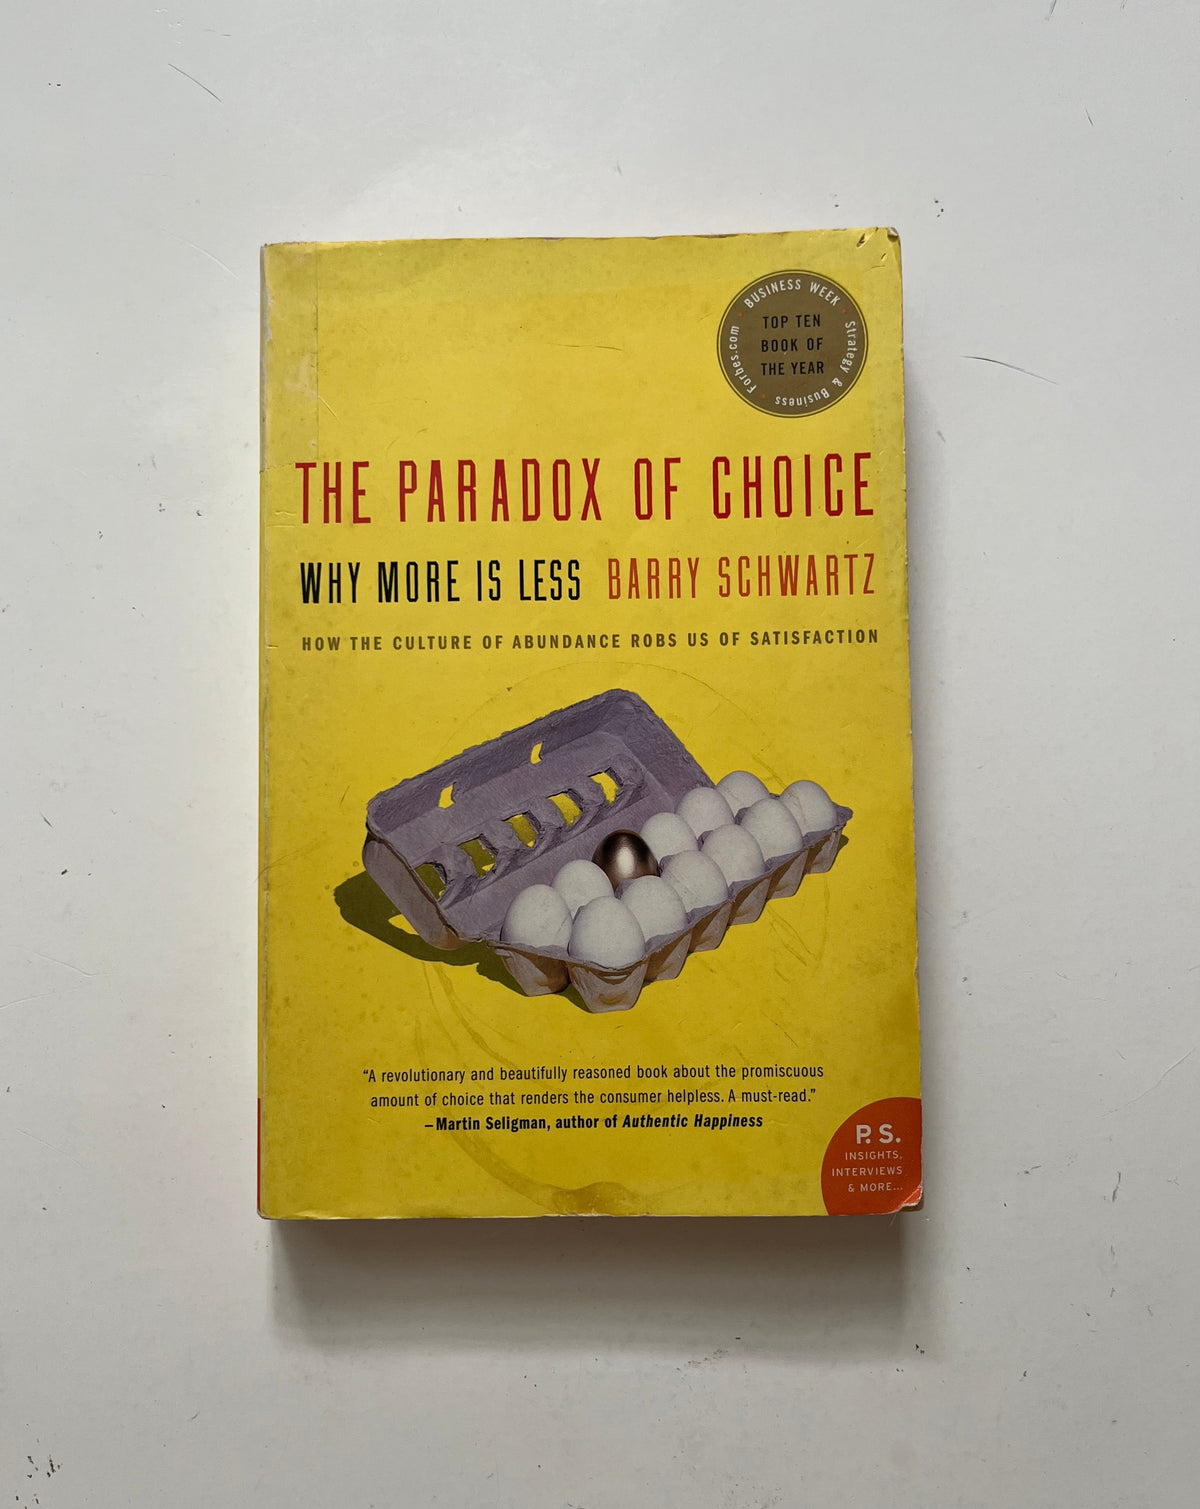 The Paradox of Choice: Why More is Less (How the Culture of Abundance Robs Us of Satisfaction) by Barry Schwartz